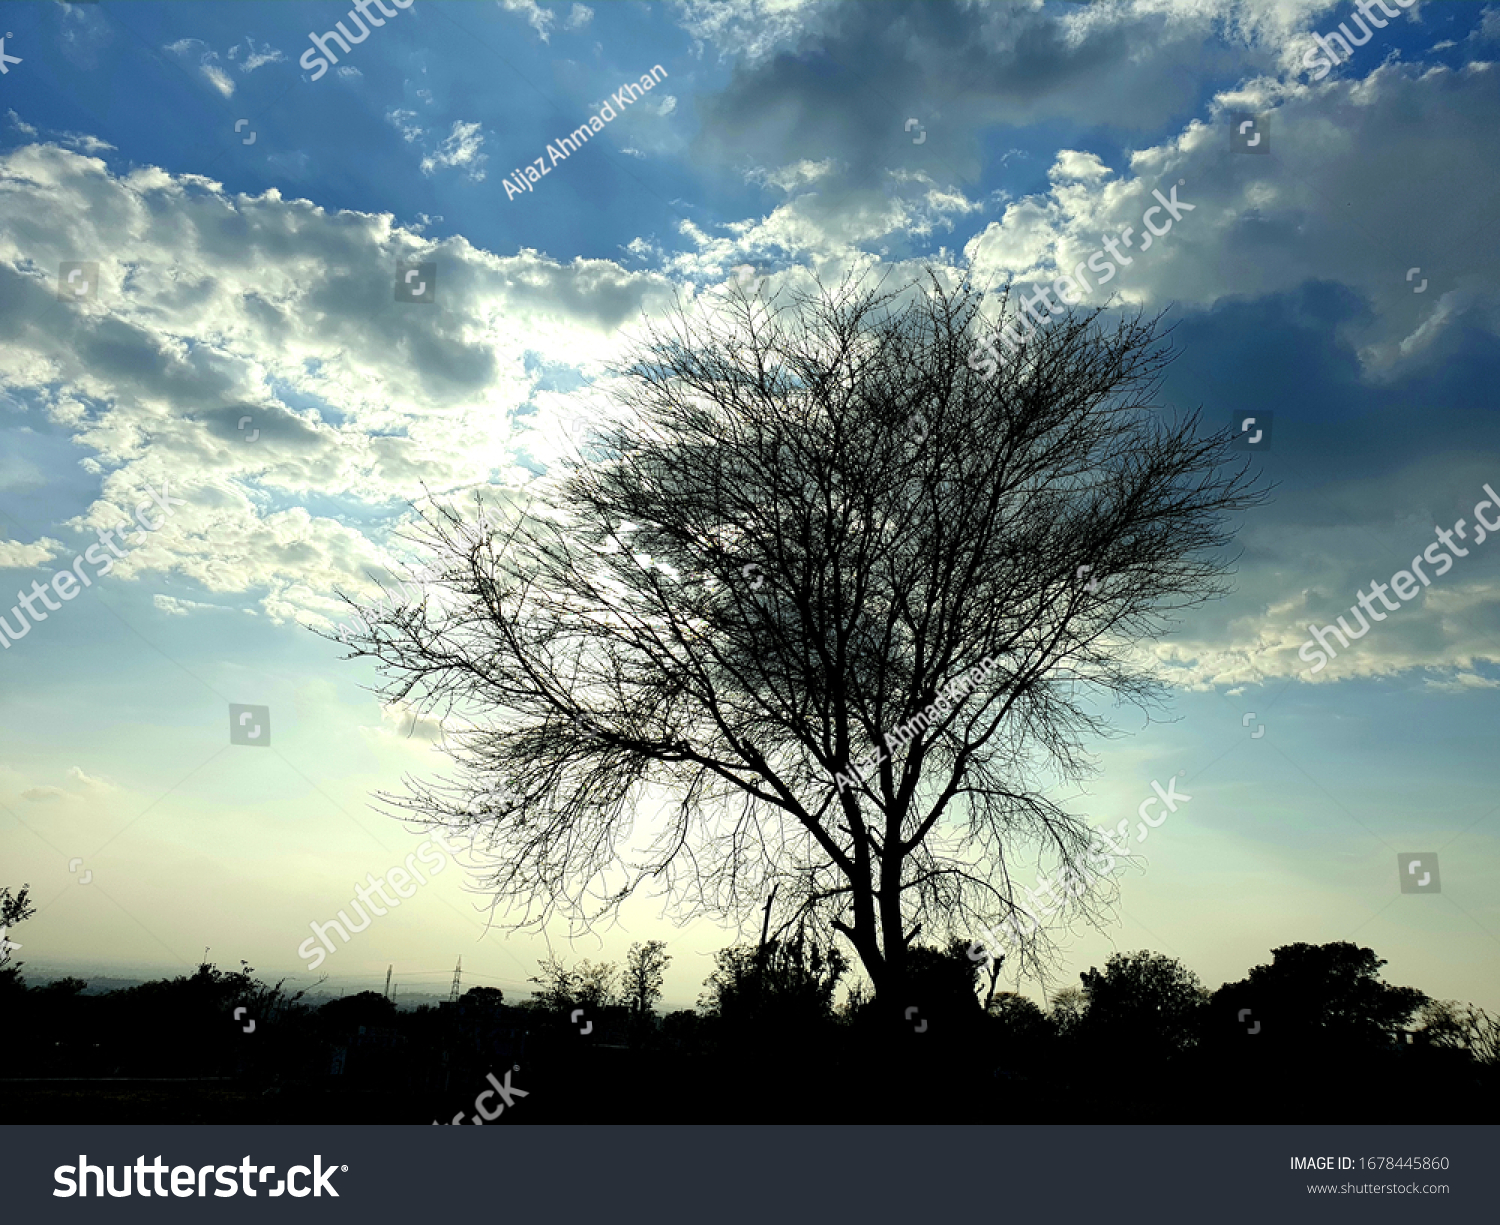 Open beautiful sky a tree and colorful atmosphere . A view of village road jangle forests and electric pools and wires seems. Sky blue white and sun trees are also in frame. A beautiful view #1678445860